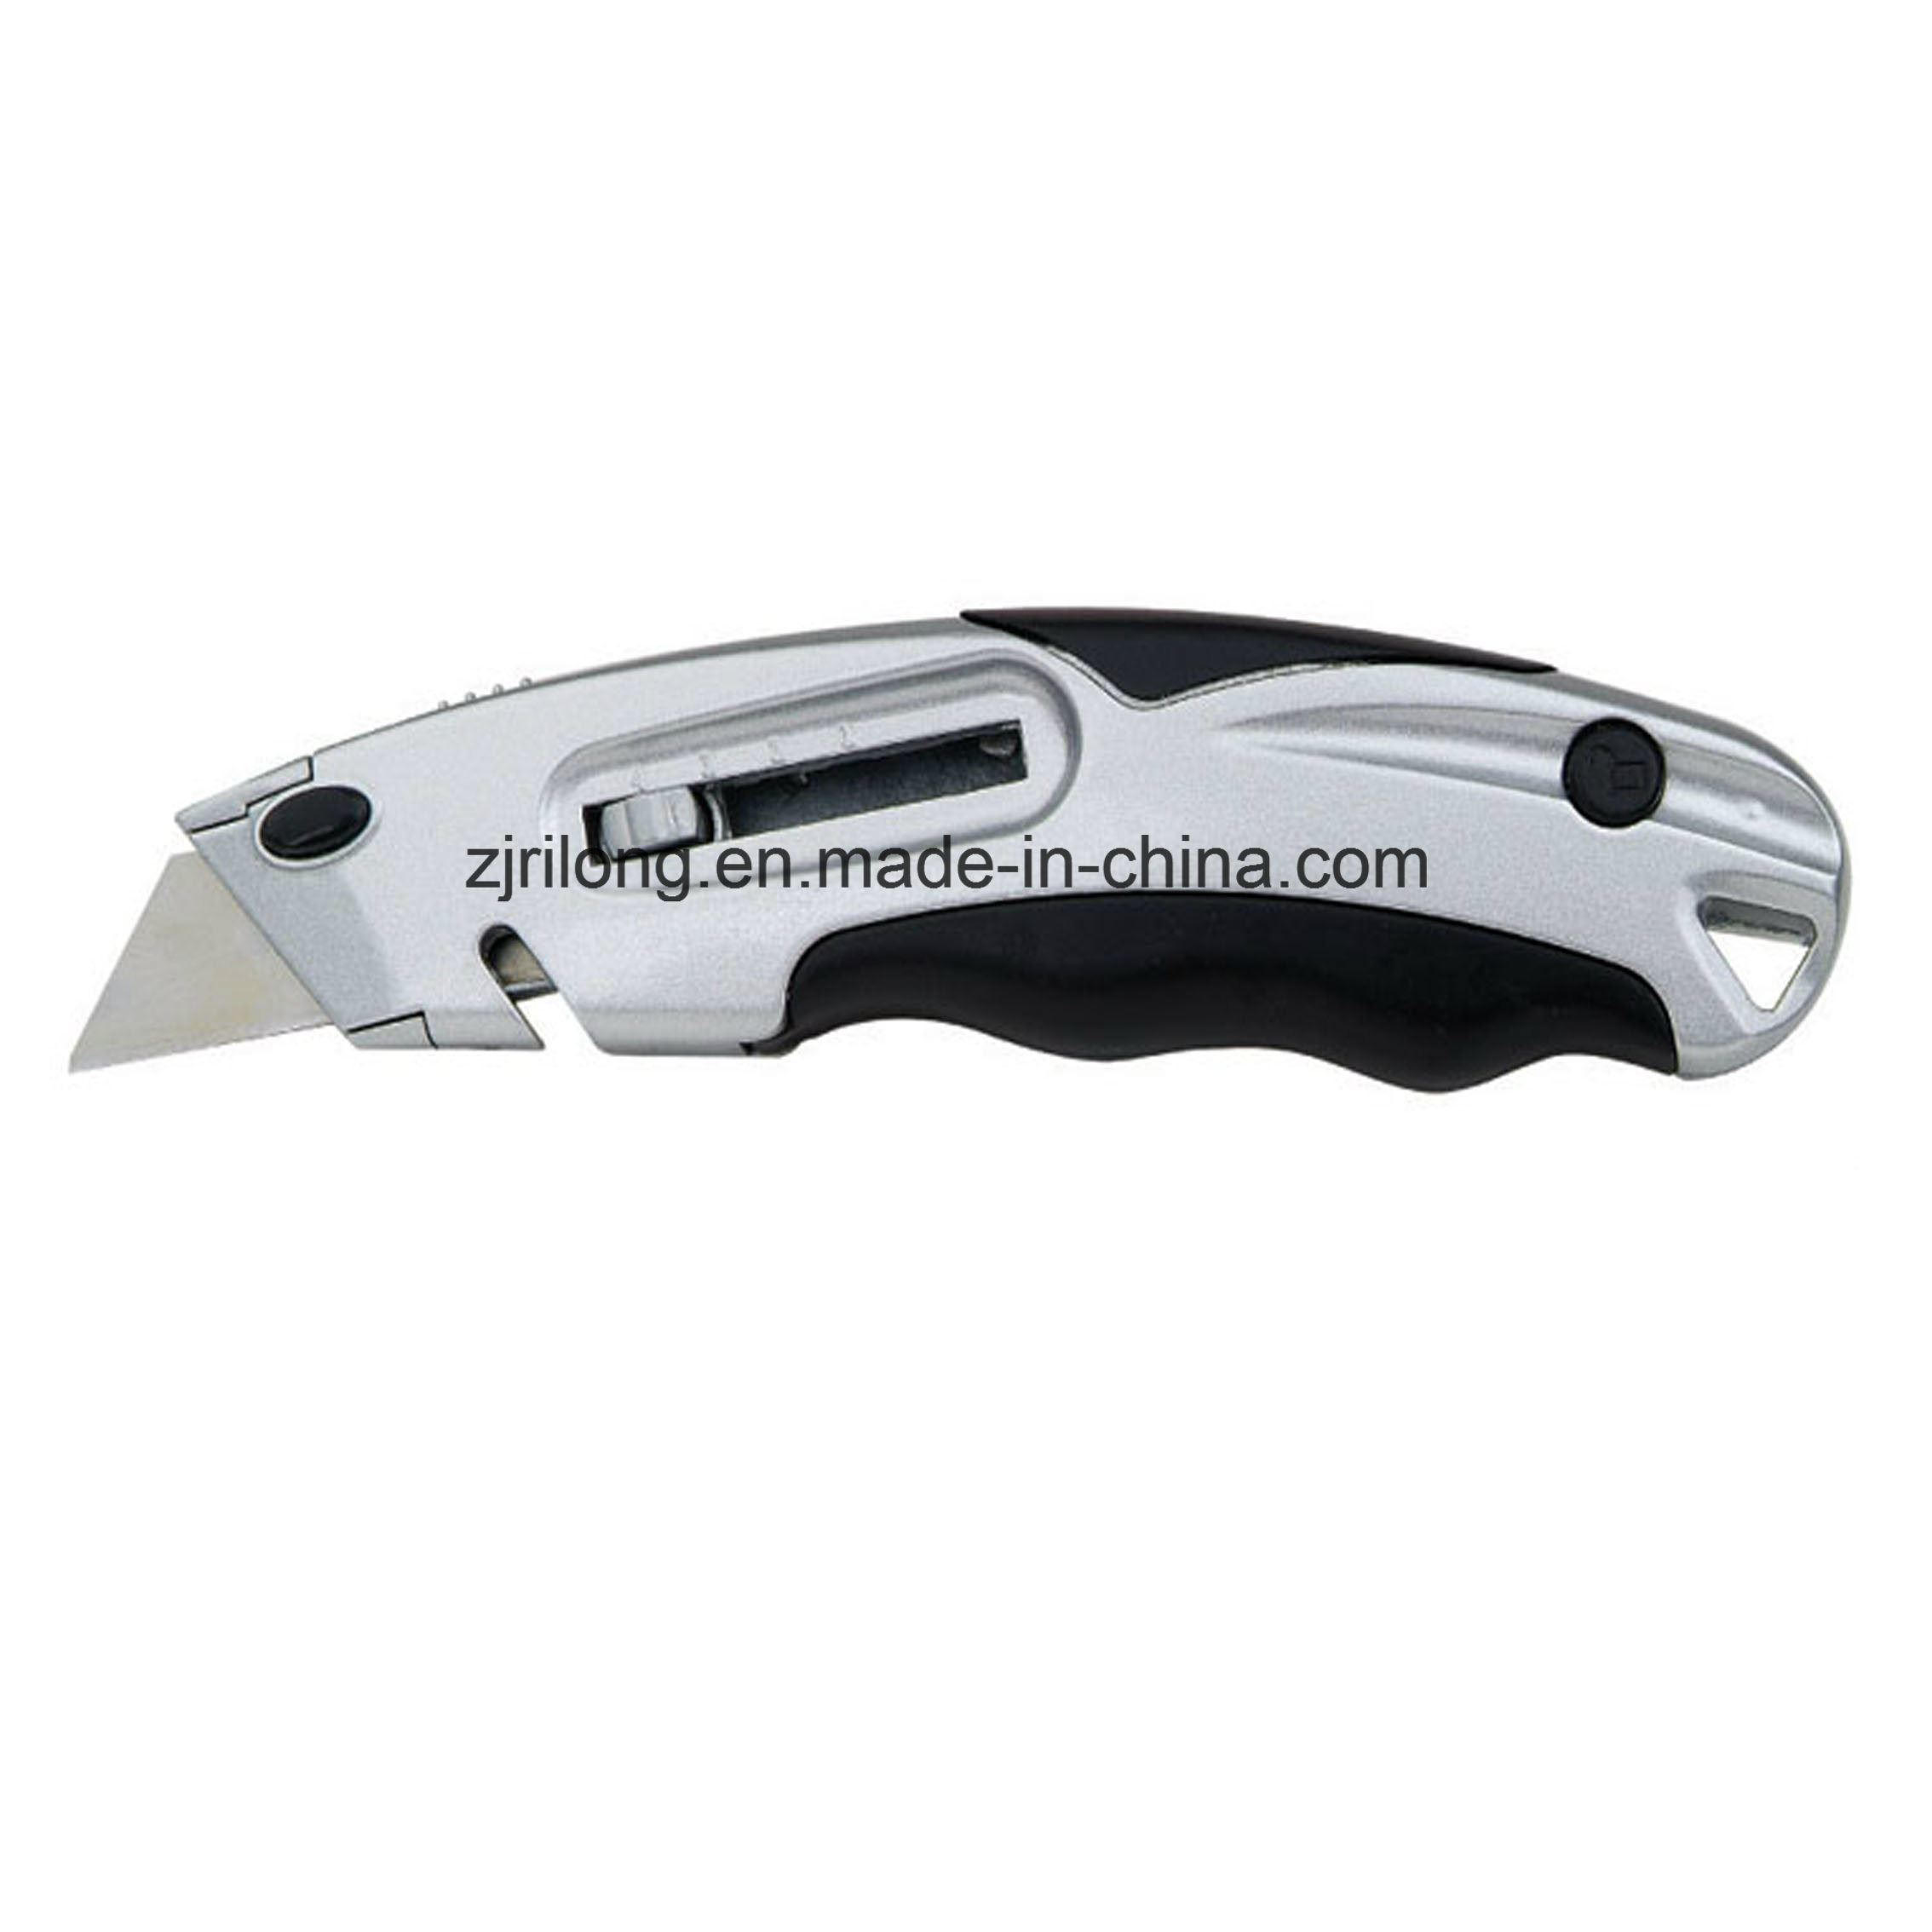 Quick Change Utility Knife with Spare Blades